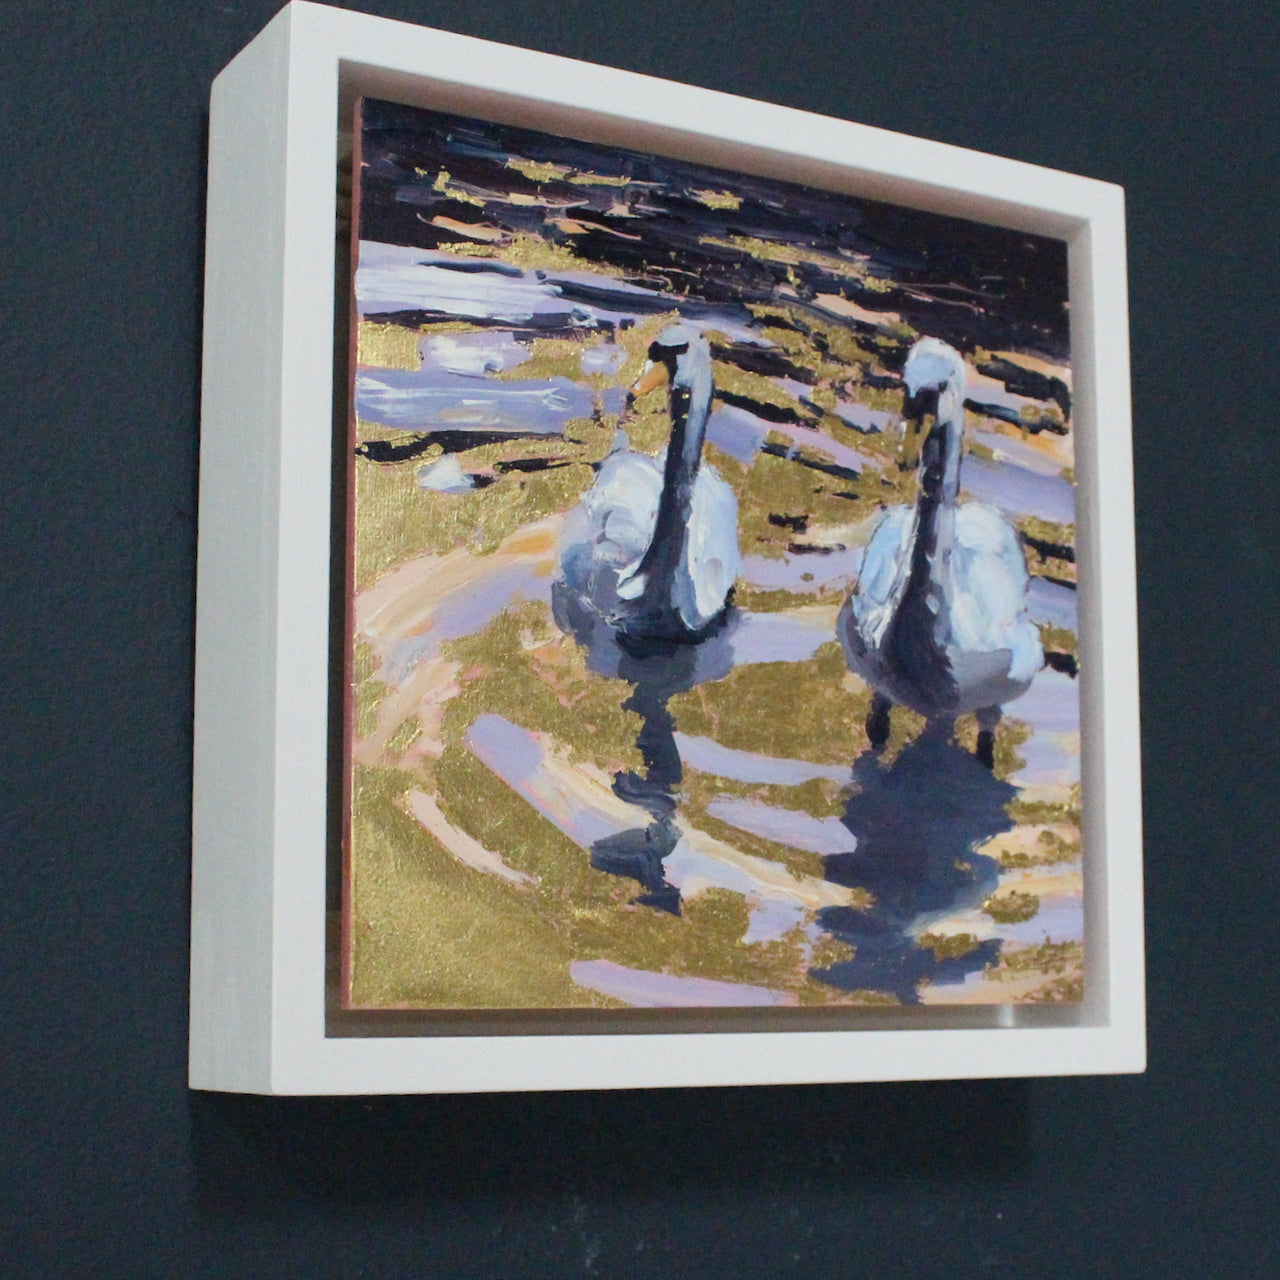 Framed square painting by artist Jill Hudson with gold water reflection and two swans swimming